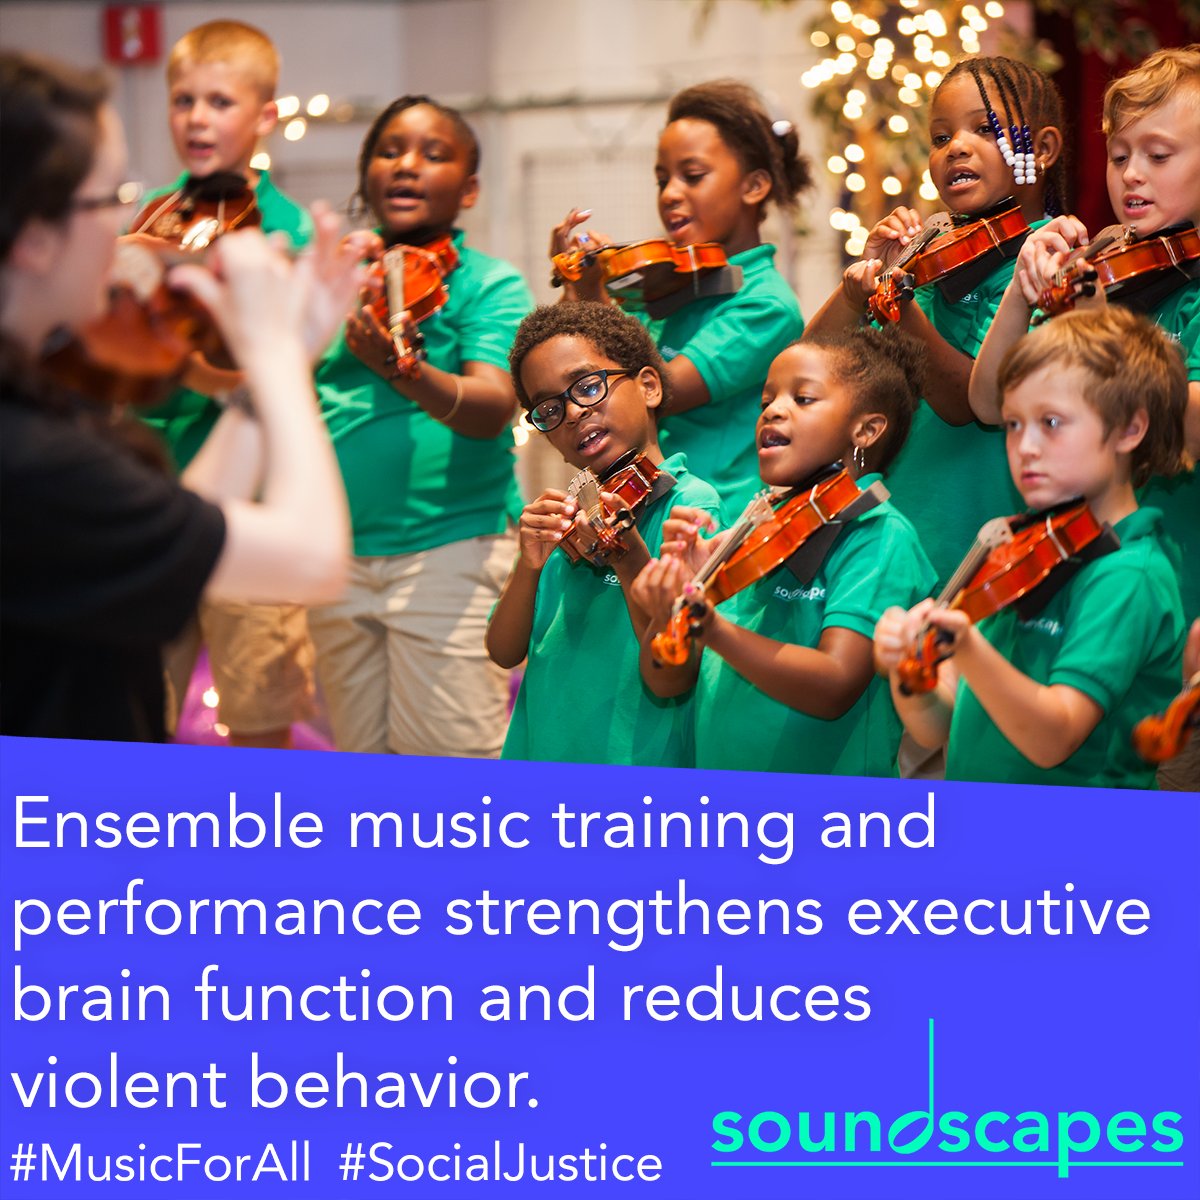 Learn more about Soundscapes ---> ow.ly/70fE30ez5nd #Soundscapes #SocialJustice #MusicForAll #ElSistemaUSA